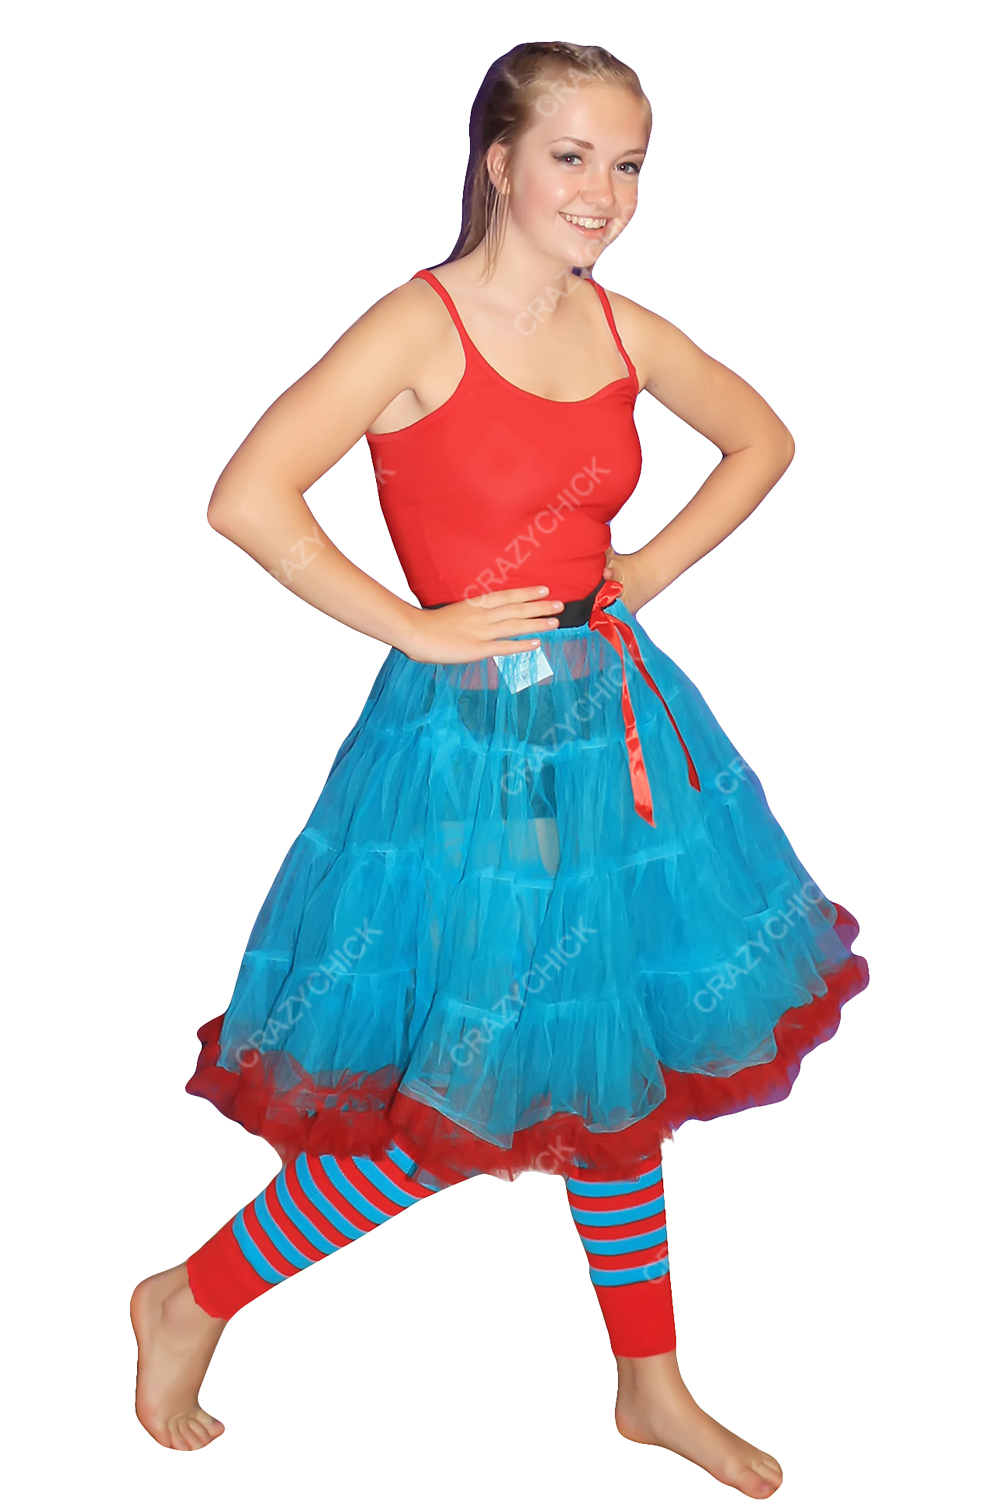 Crazy Chick Adult 2 Layer Ruffle Edged Tutu Skirt (23 Inches)